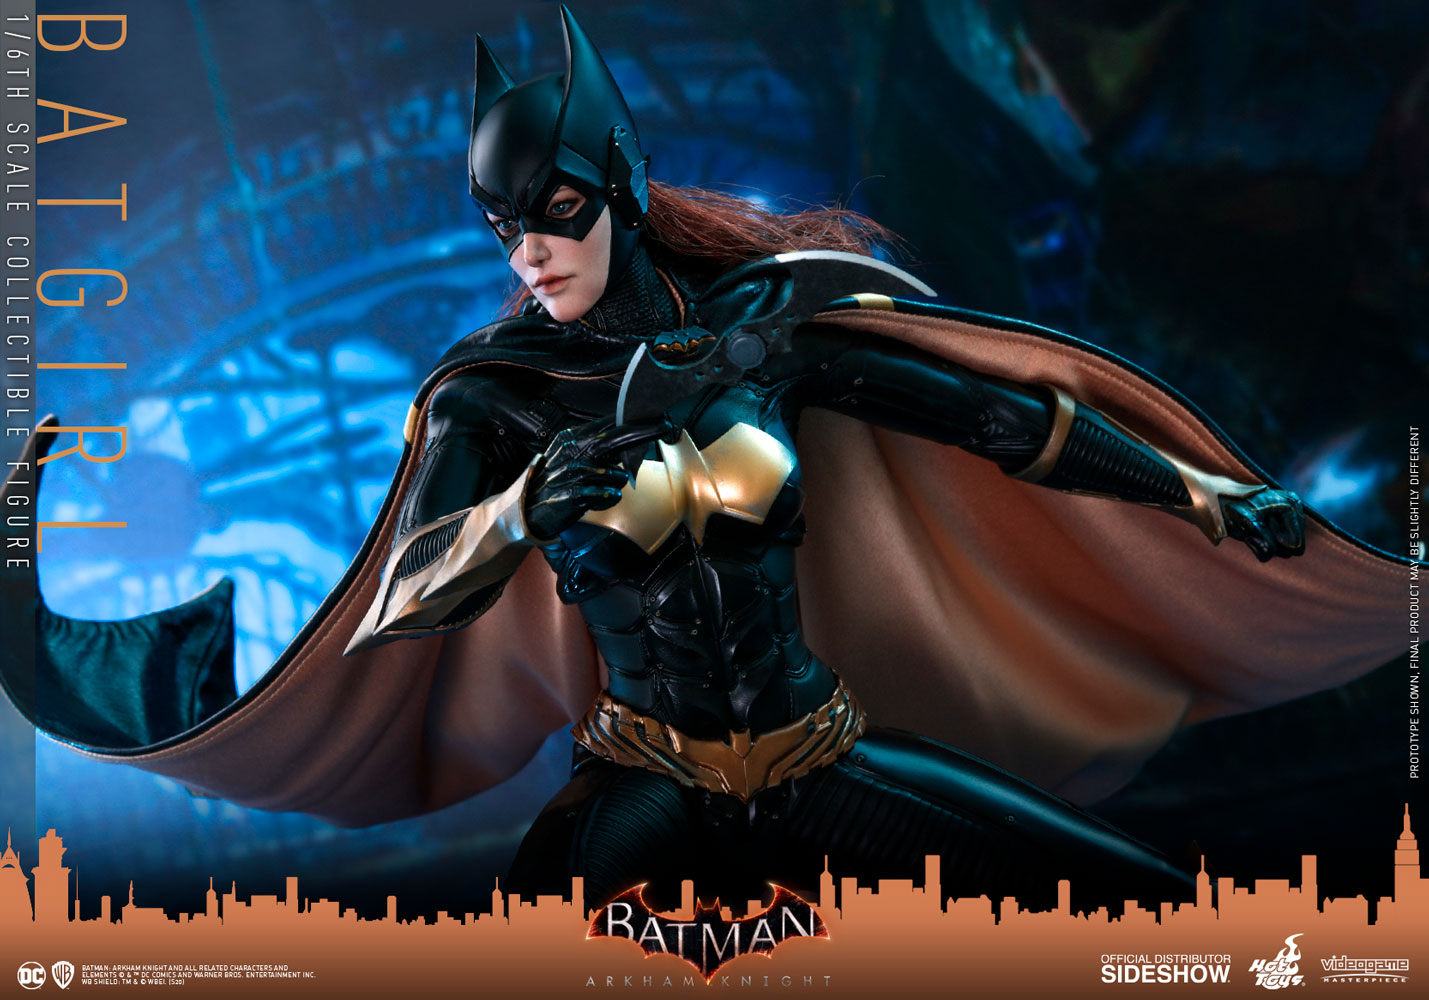 Batgirl Sixth Scale Collectible Figure by Hot Toys | Sideshow Collectibles